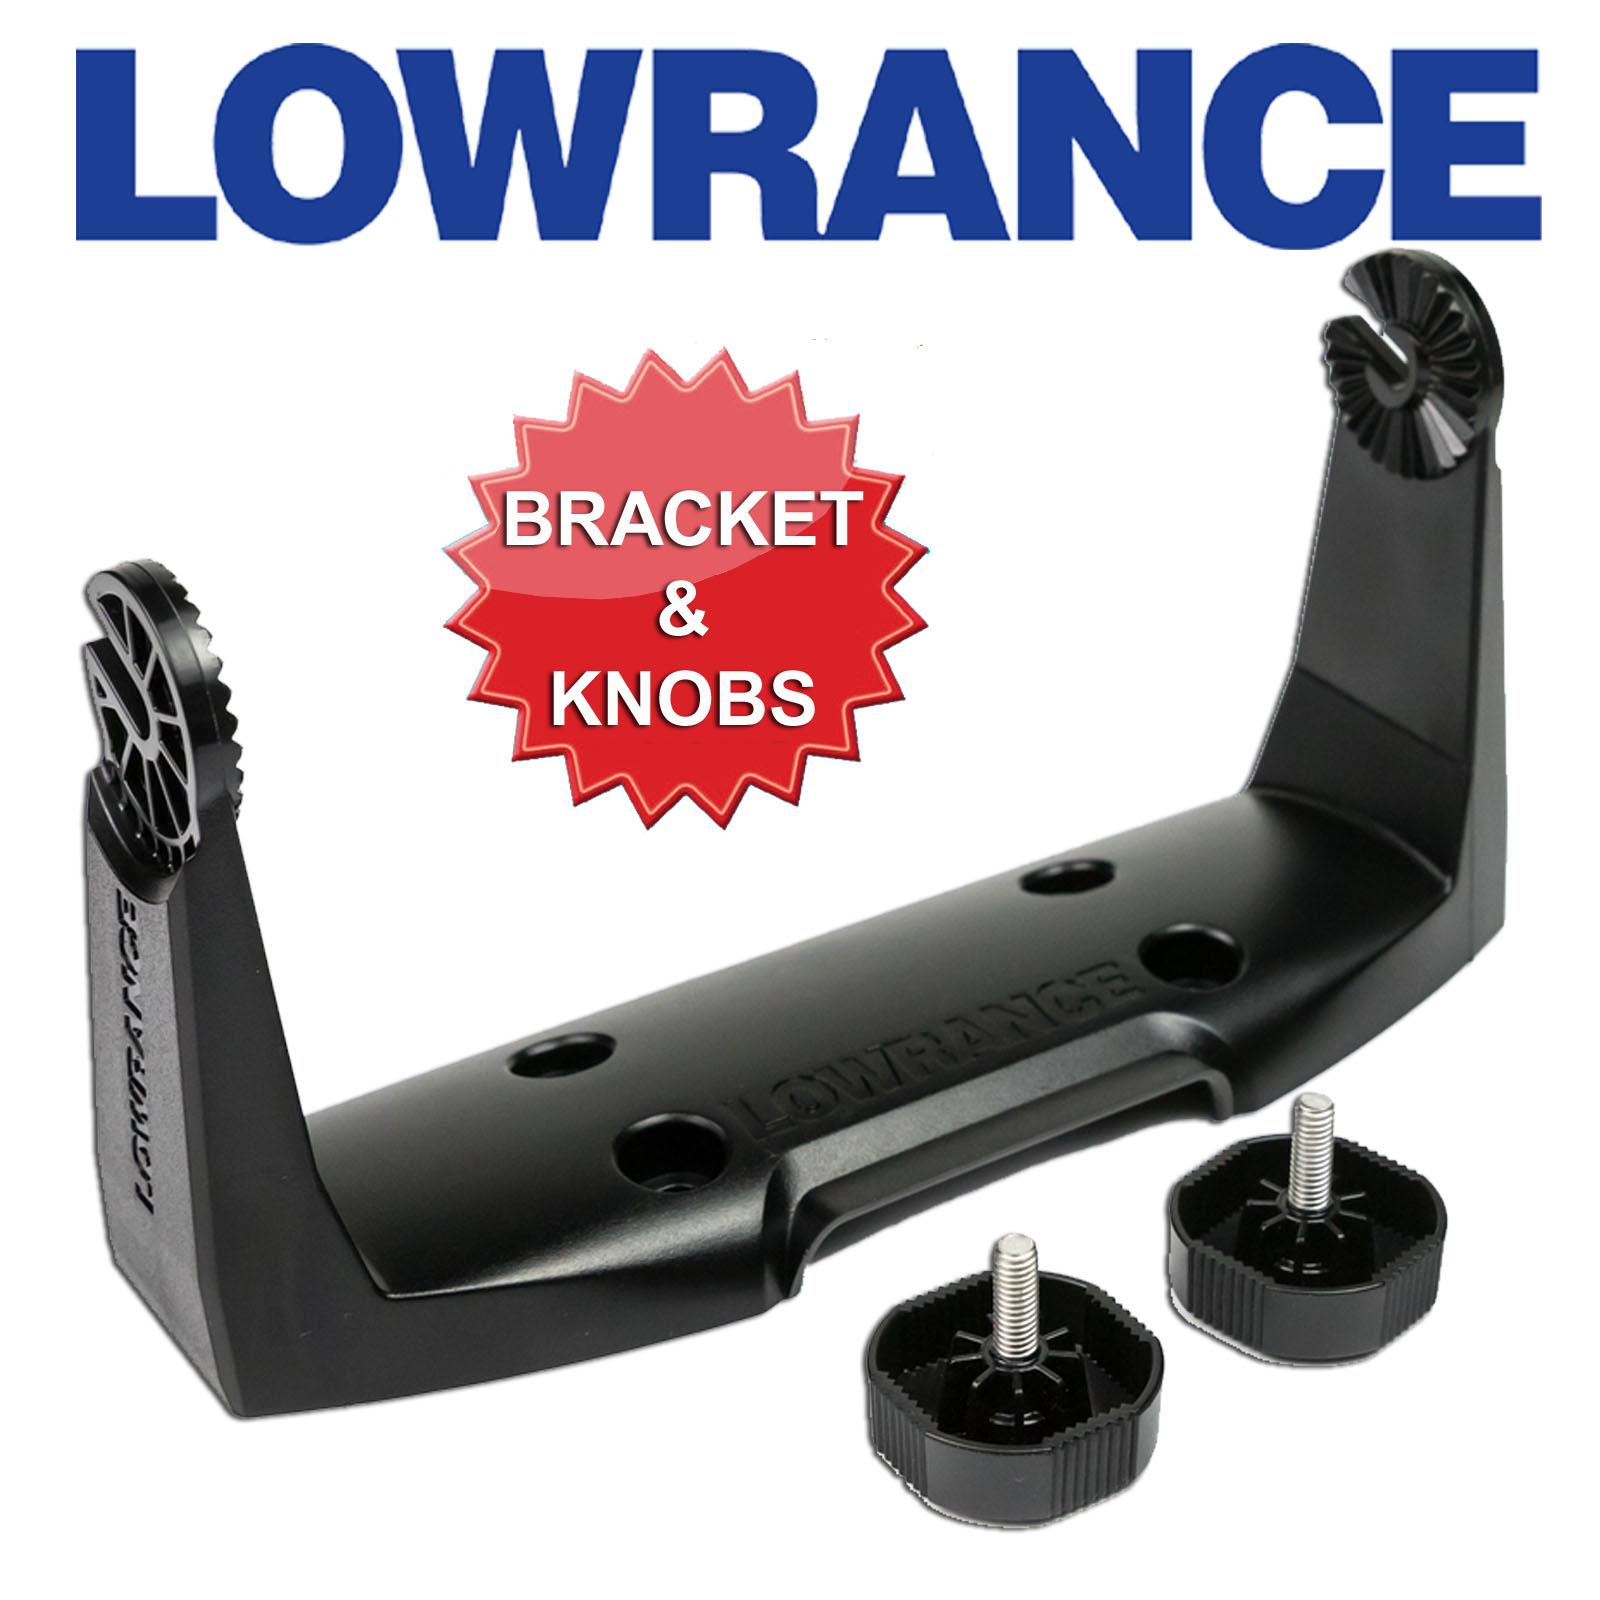 000-11019-001 Upgrade Gimbal Bracket Mounting Bracket with Knobs for  Lowrance HDS-7 Touchscreen Models HDS Gen3, HDS Gen2 Touch, Elite and Hook 7